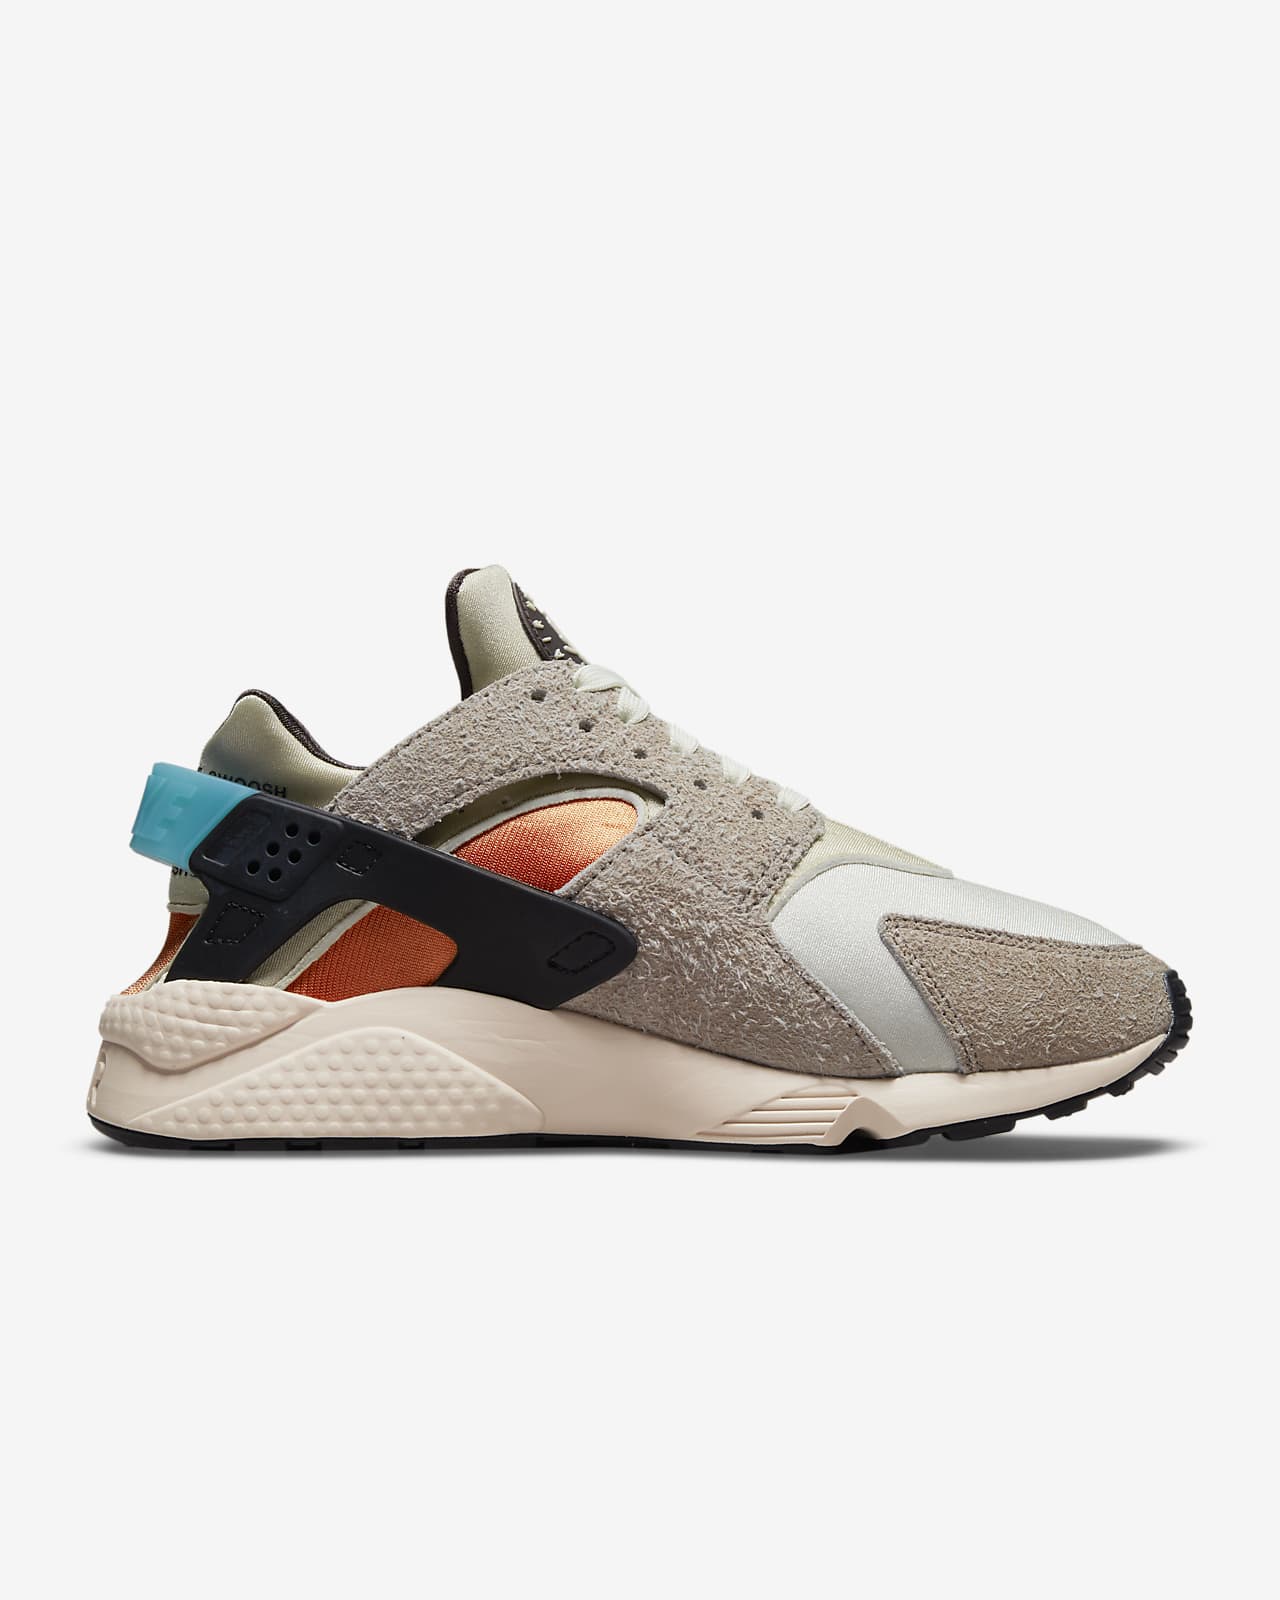 nike huarache, magnanimous disposition UP TO OFF - www.thegreathelp.com